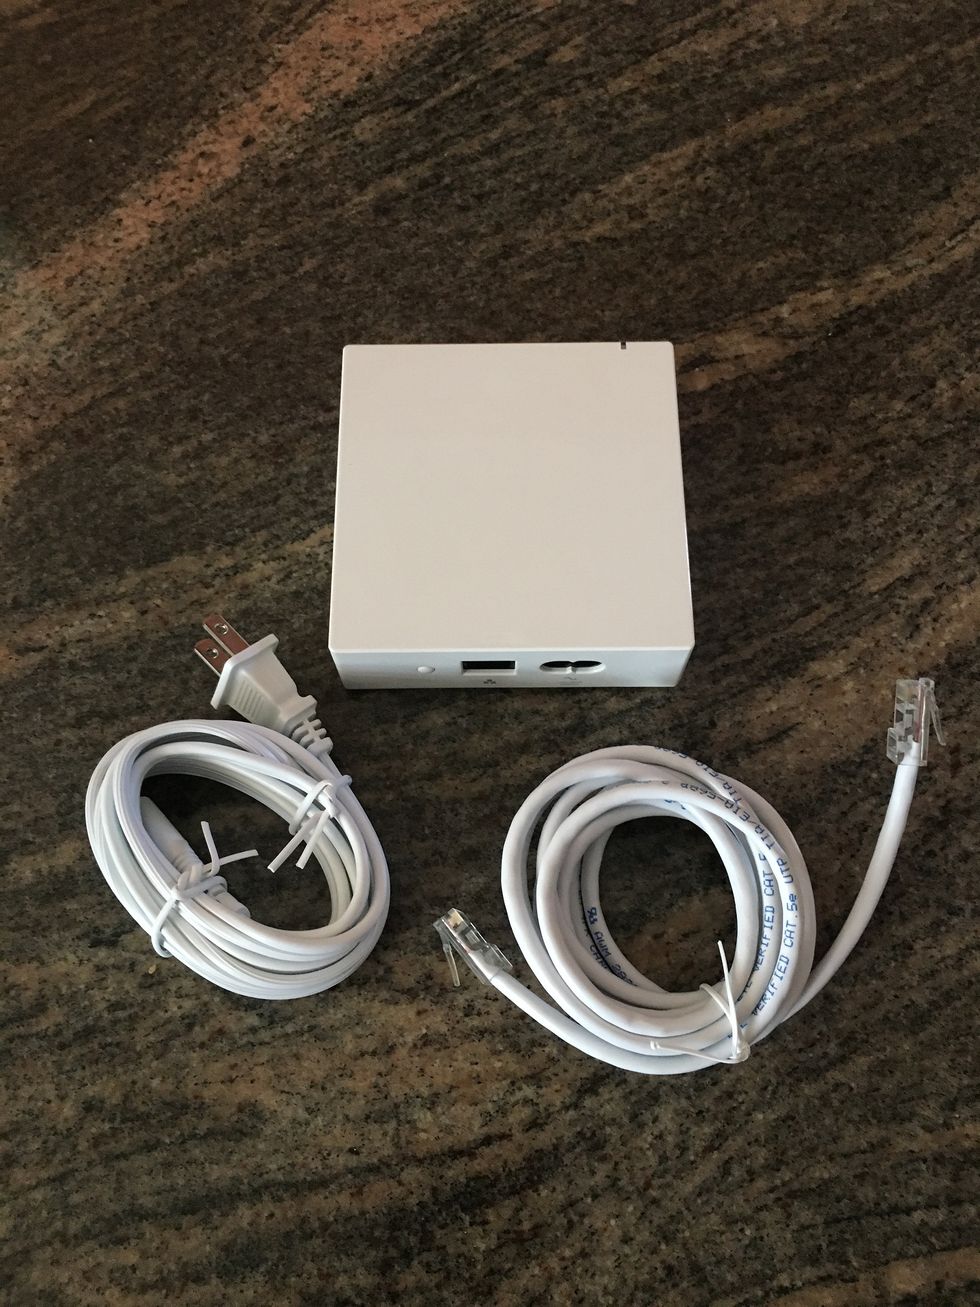 a photo of Insteon Hub with power cord and ethernet cable